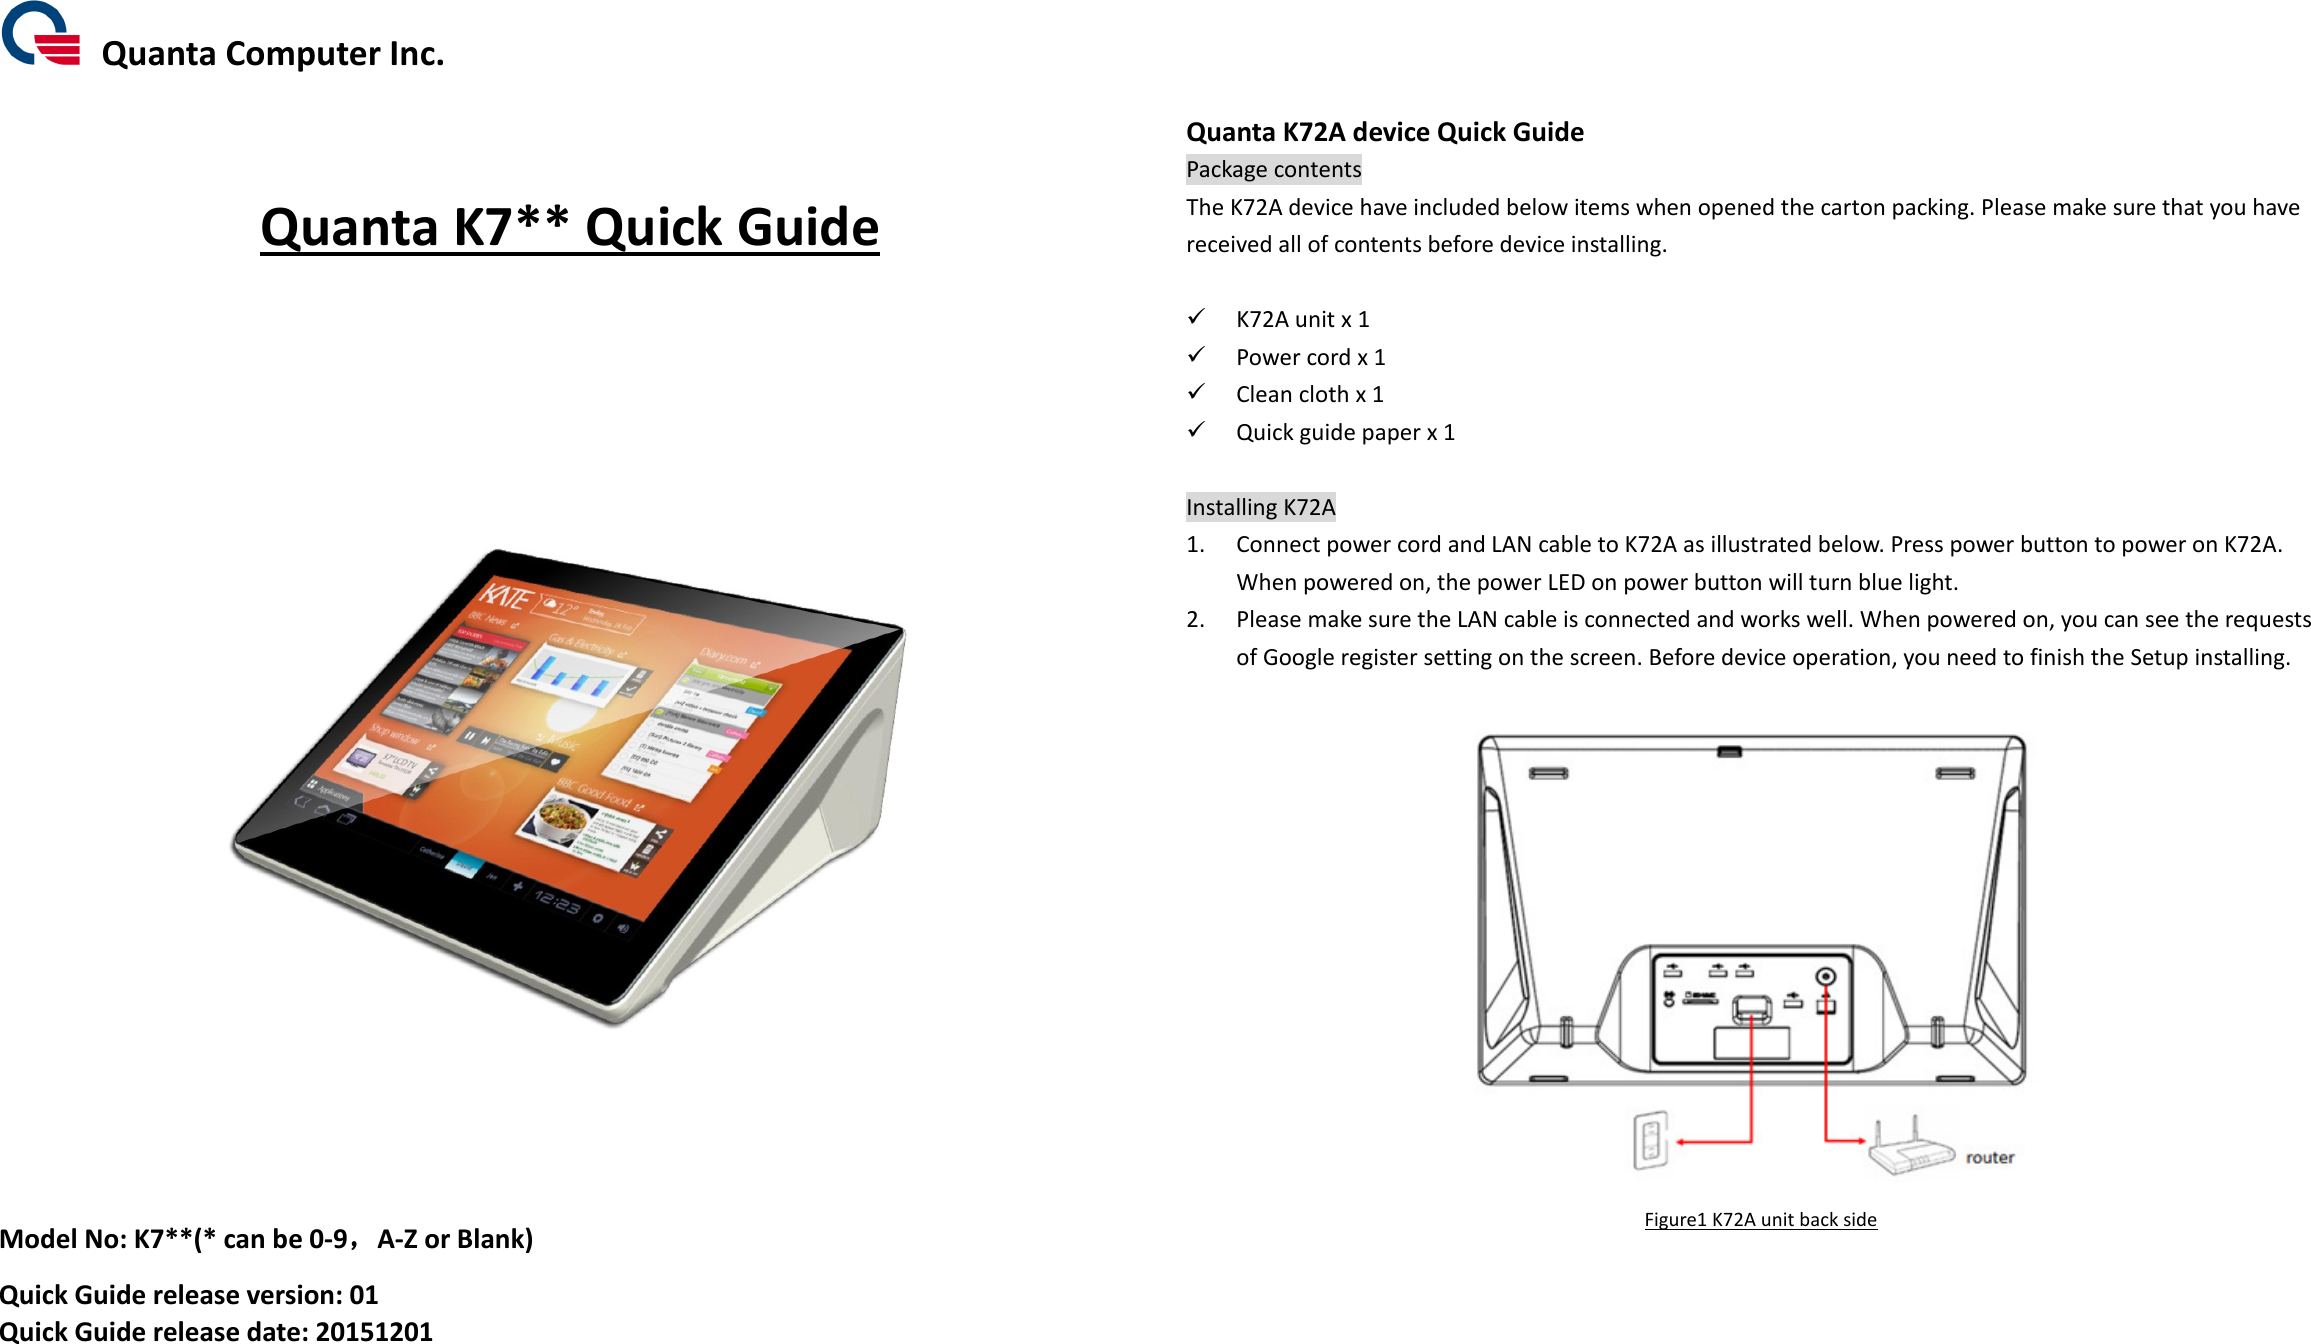   Quanta Computer Inc.    Quanta K7** Quick Guide             Model No: K7**(* can be 0-9，，，，A-Z or Blank) Quick Guide release version: 01 Quick Guide release date: 20151201        Quanta K72A device Quick Guide Package contents The K72A device have included below items when opened the carton packing. Please make sure that you have received all of contents before device installing.   K72A unit x 1  Power cord x 1  Clean cloth x 1  Quick guide paper x 1  Installing K72A 1. Connect power cord and LAN cable to K72A as illustrated below. Press power button to power on K72A.   When powered on, the power LED on power button will turn blue light.   2. Please make sure the LAN cable is connected and works well. When powered on, you can see the requests of Google register setting on the screen. Before device operation, you need to finish the Setup installing.   Figure1 K72A unit back side          